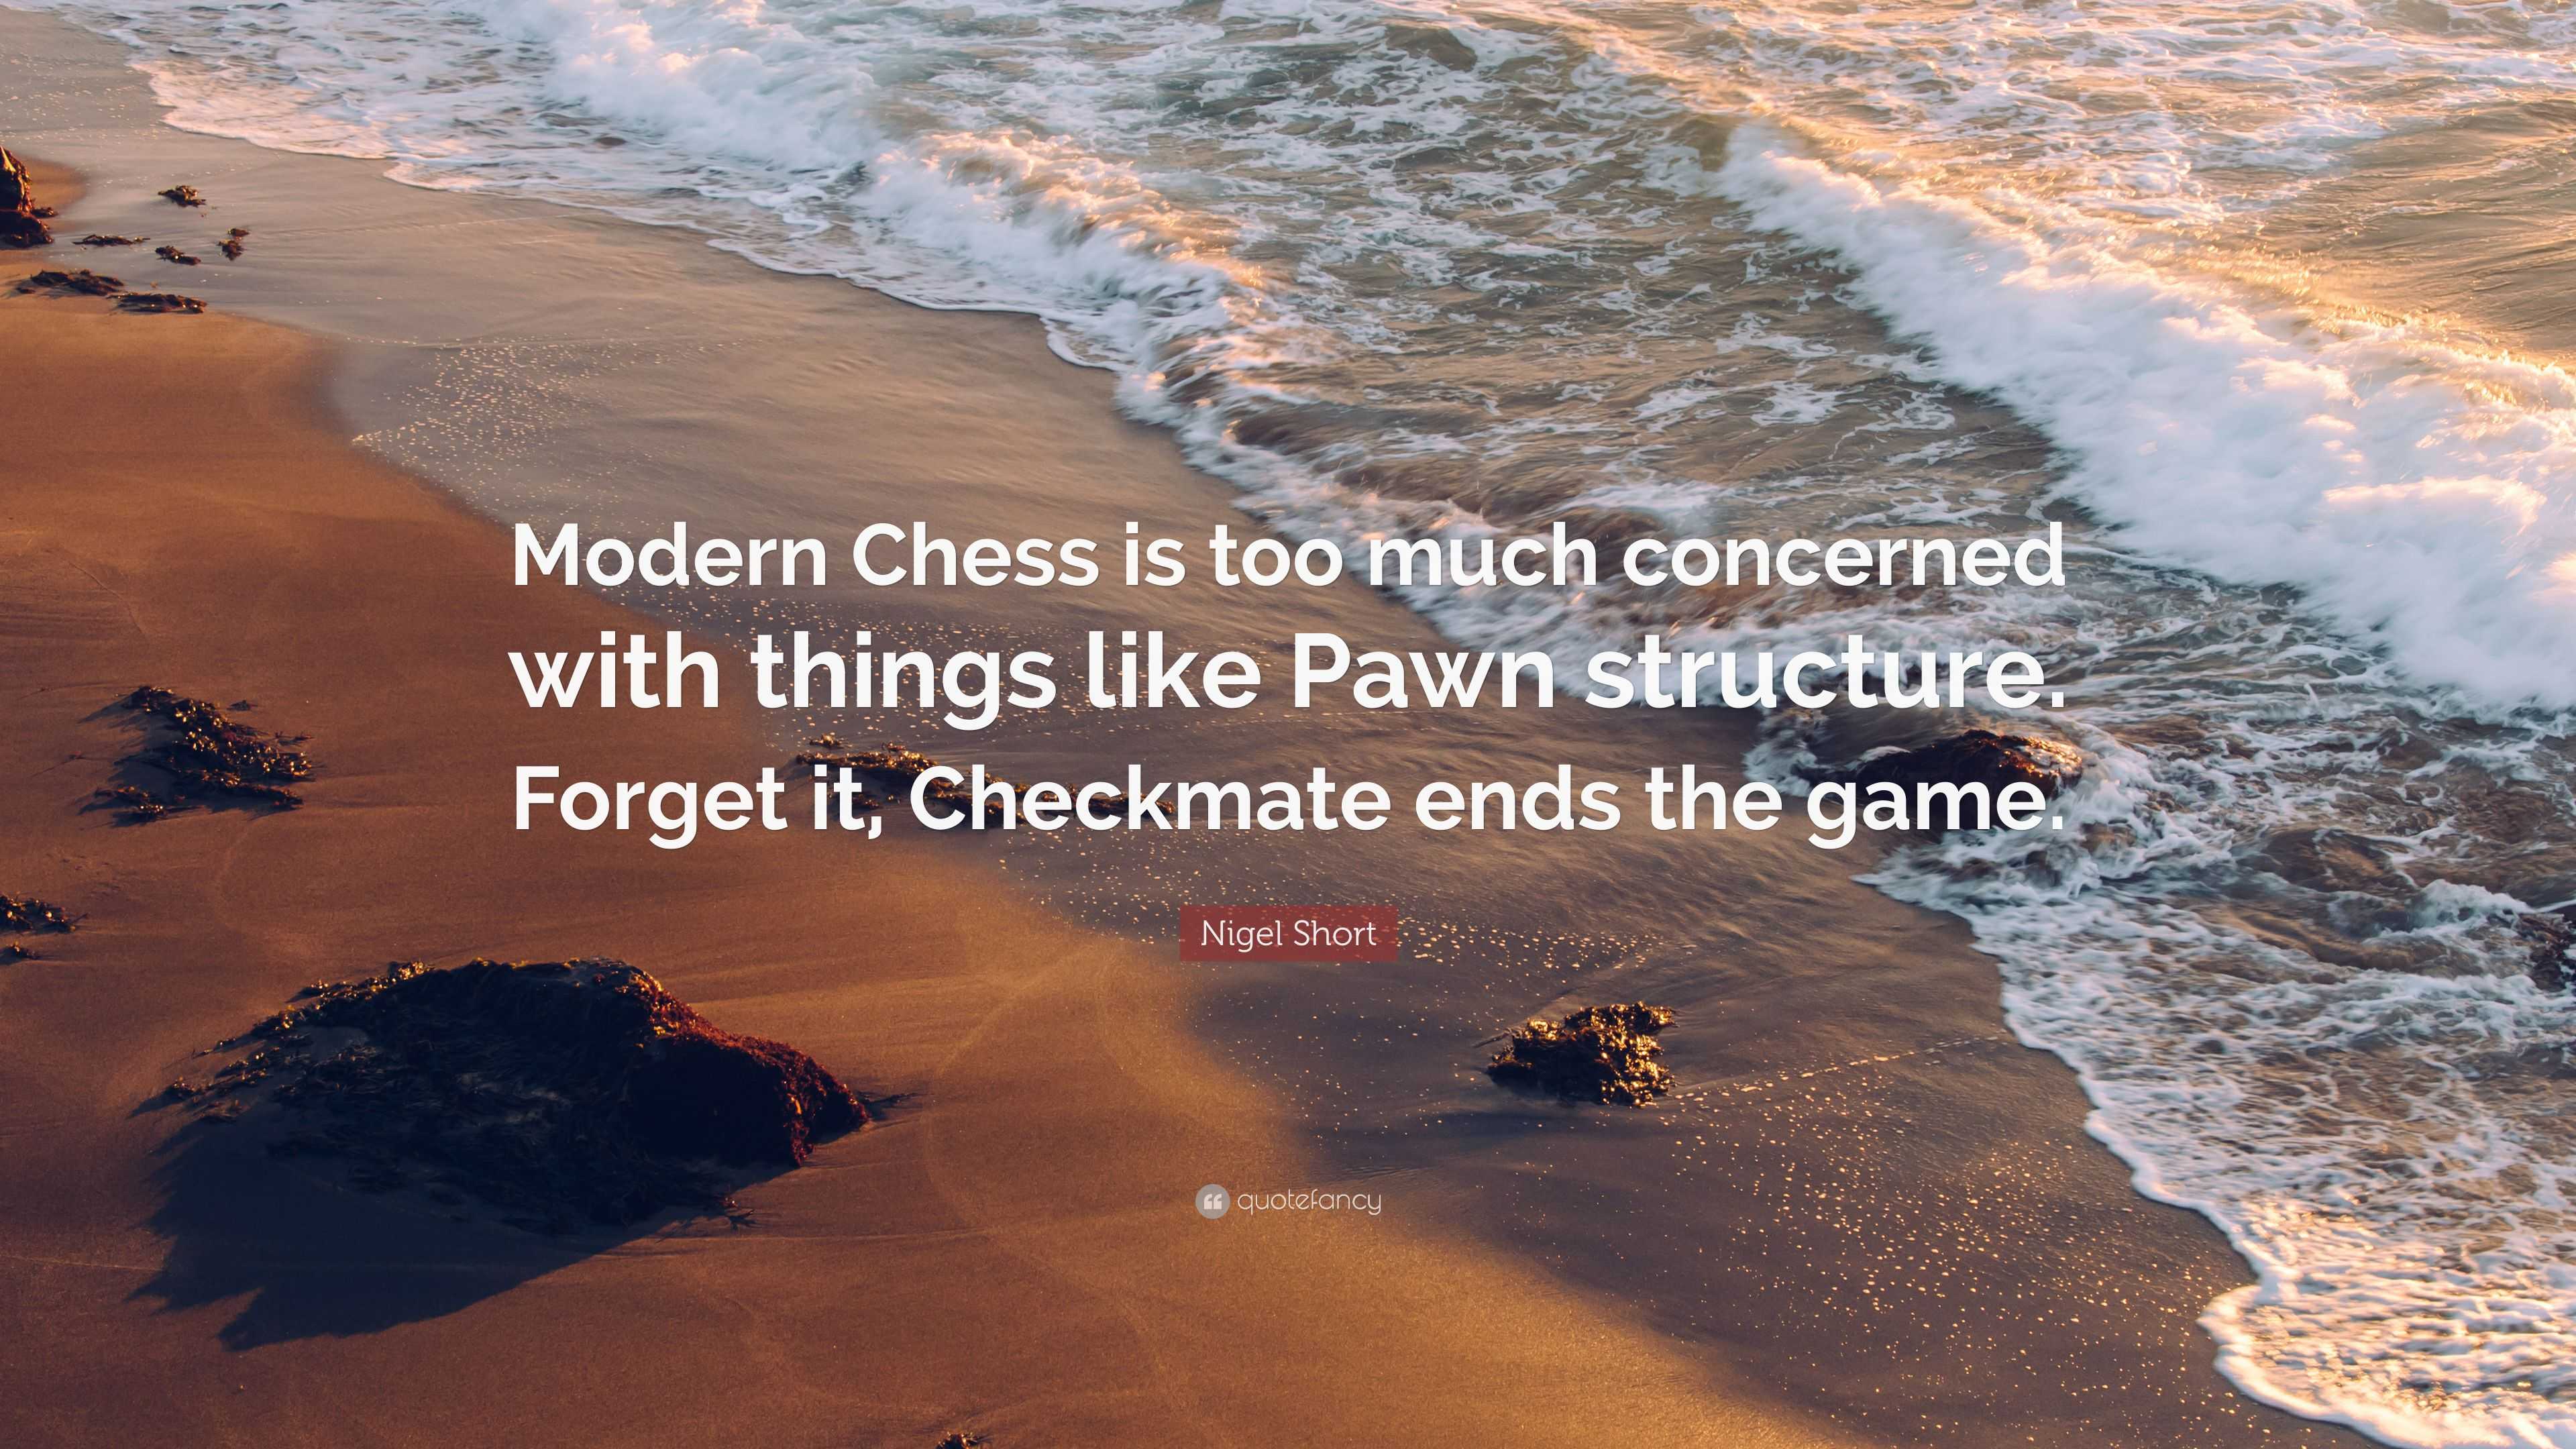 chessplayer on Instagram: Tal🔥 . . . #chess #chessboard #boardgame #game  #win #mem #chessmem #check #mate #checkmate #champion #quote #lose #joke  #smile #games #king #queen #bishop #knight #rook #pawn #bishop